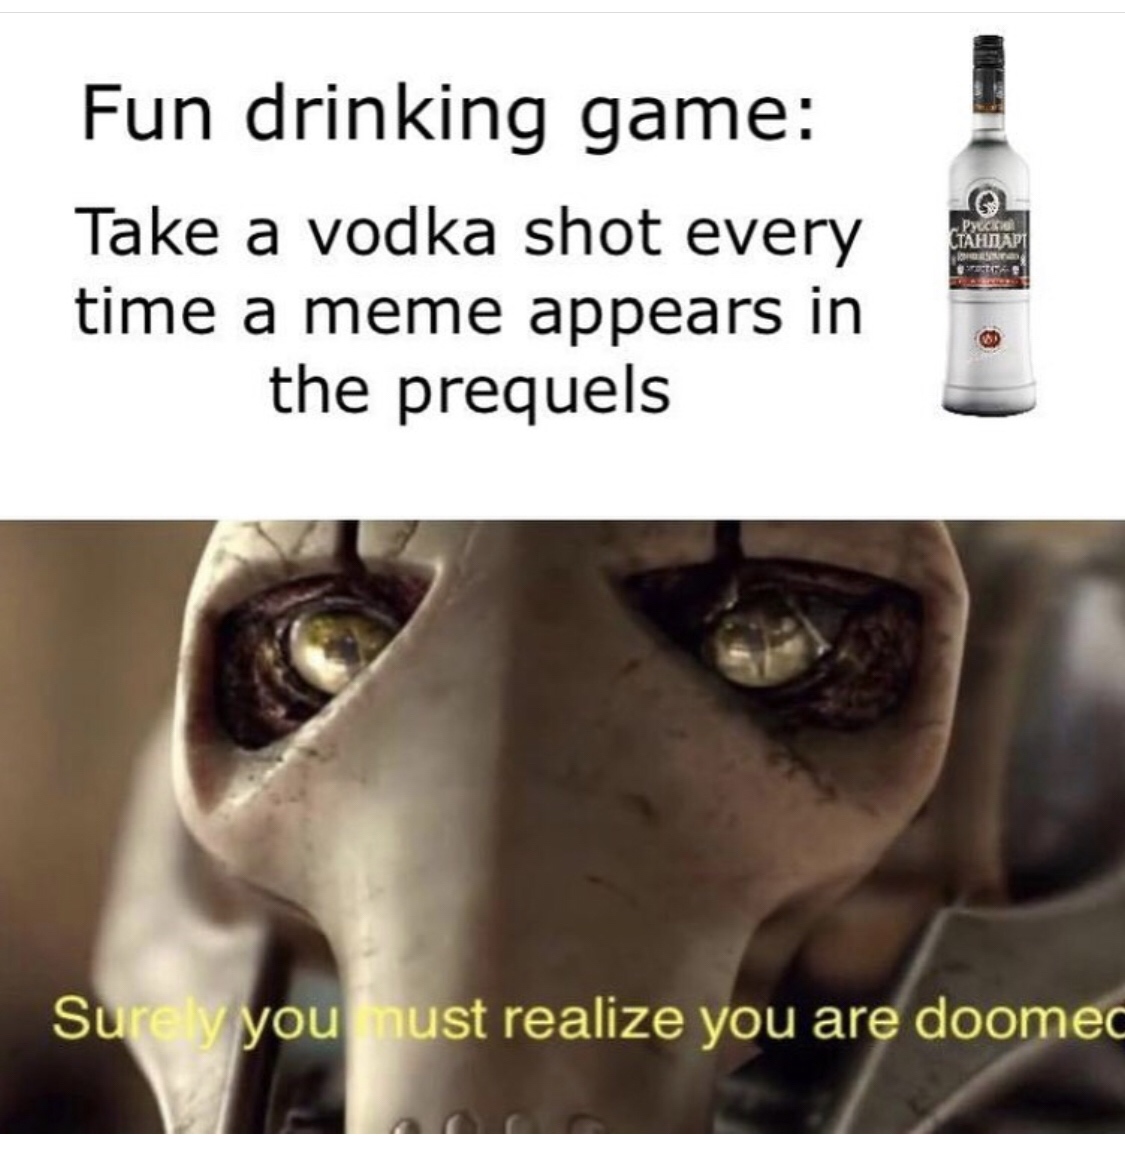 Star Wars prequel trilogy - Fun drinking game Take a vodka shot every time a meme appears in the prequels Surely you must realize you are doomec